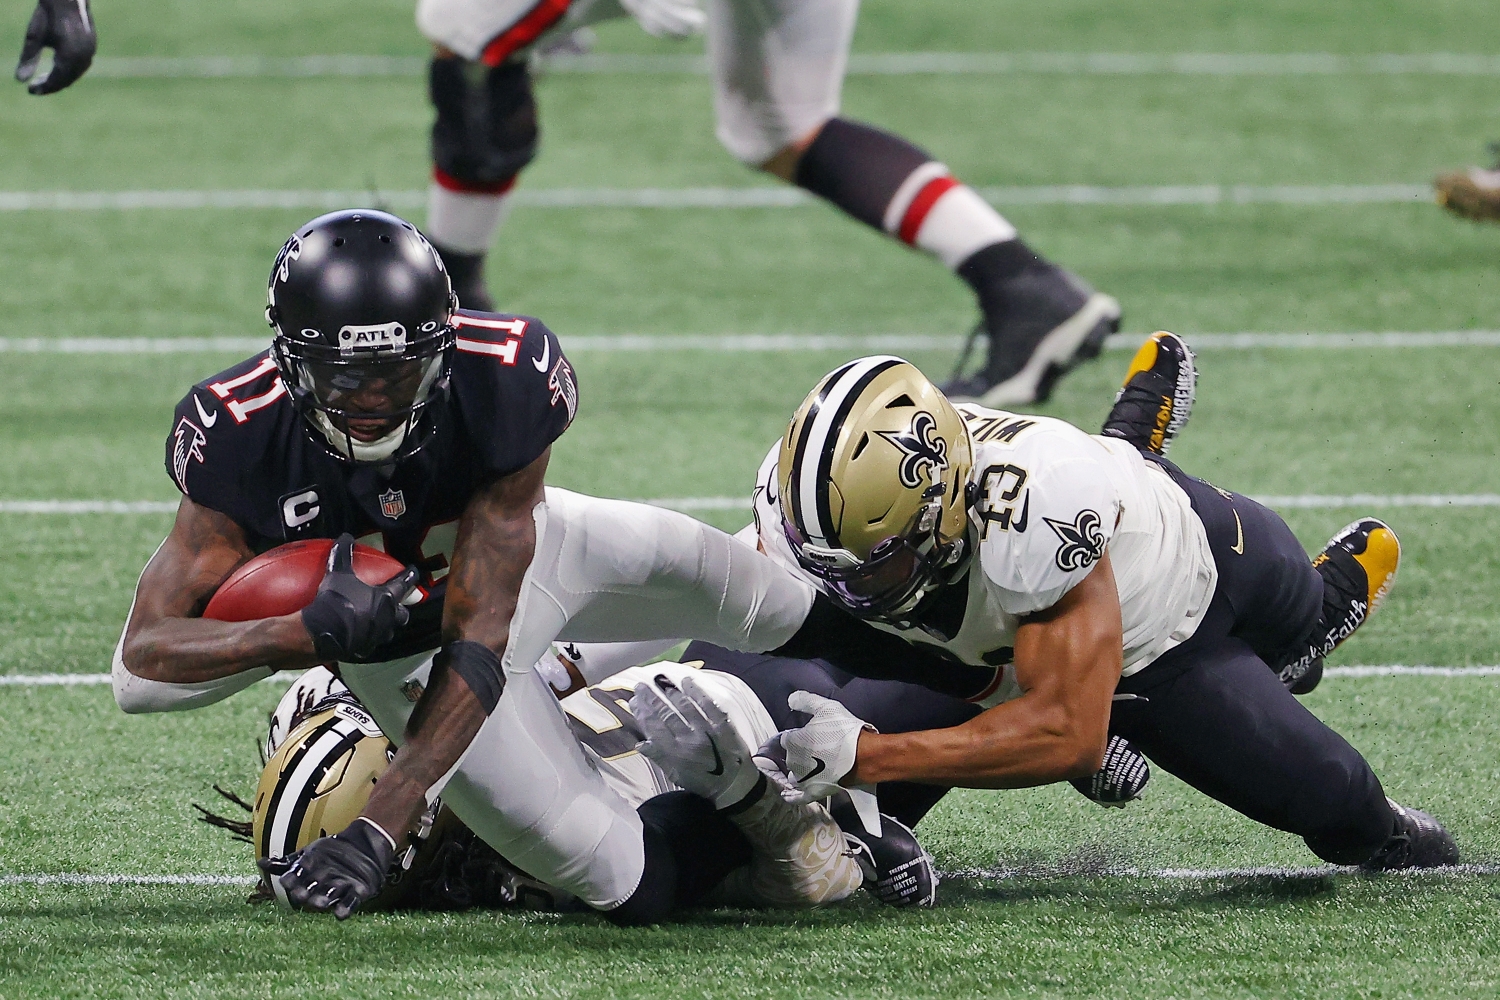 Atlanta Falcons wide receiver Julio Jones gets tackled during a game against the New Orleans Saints.